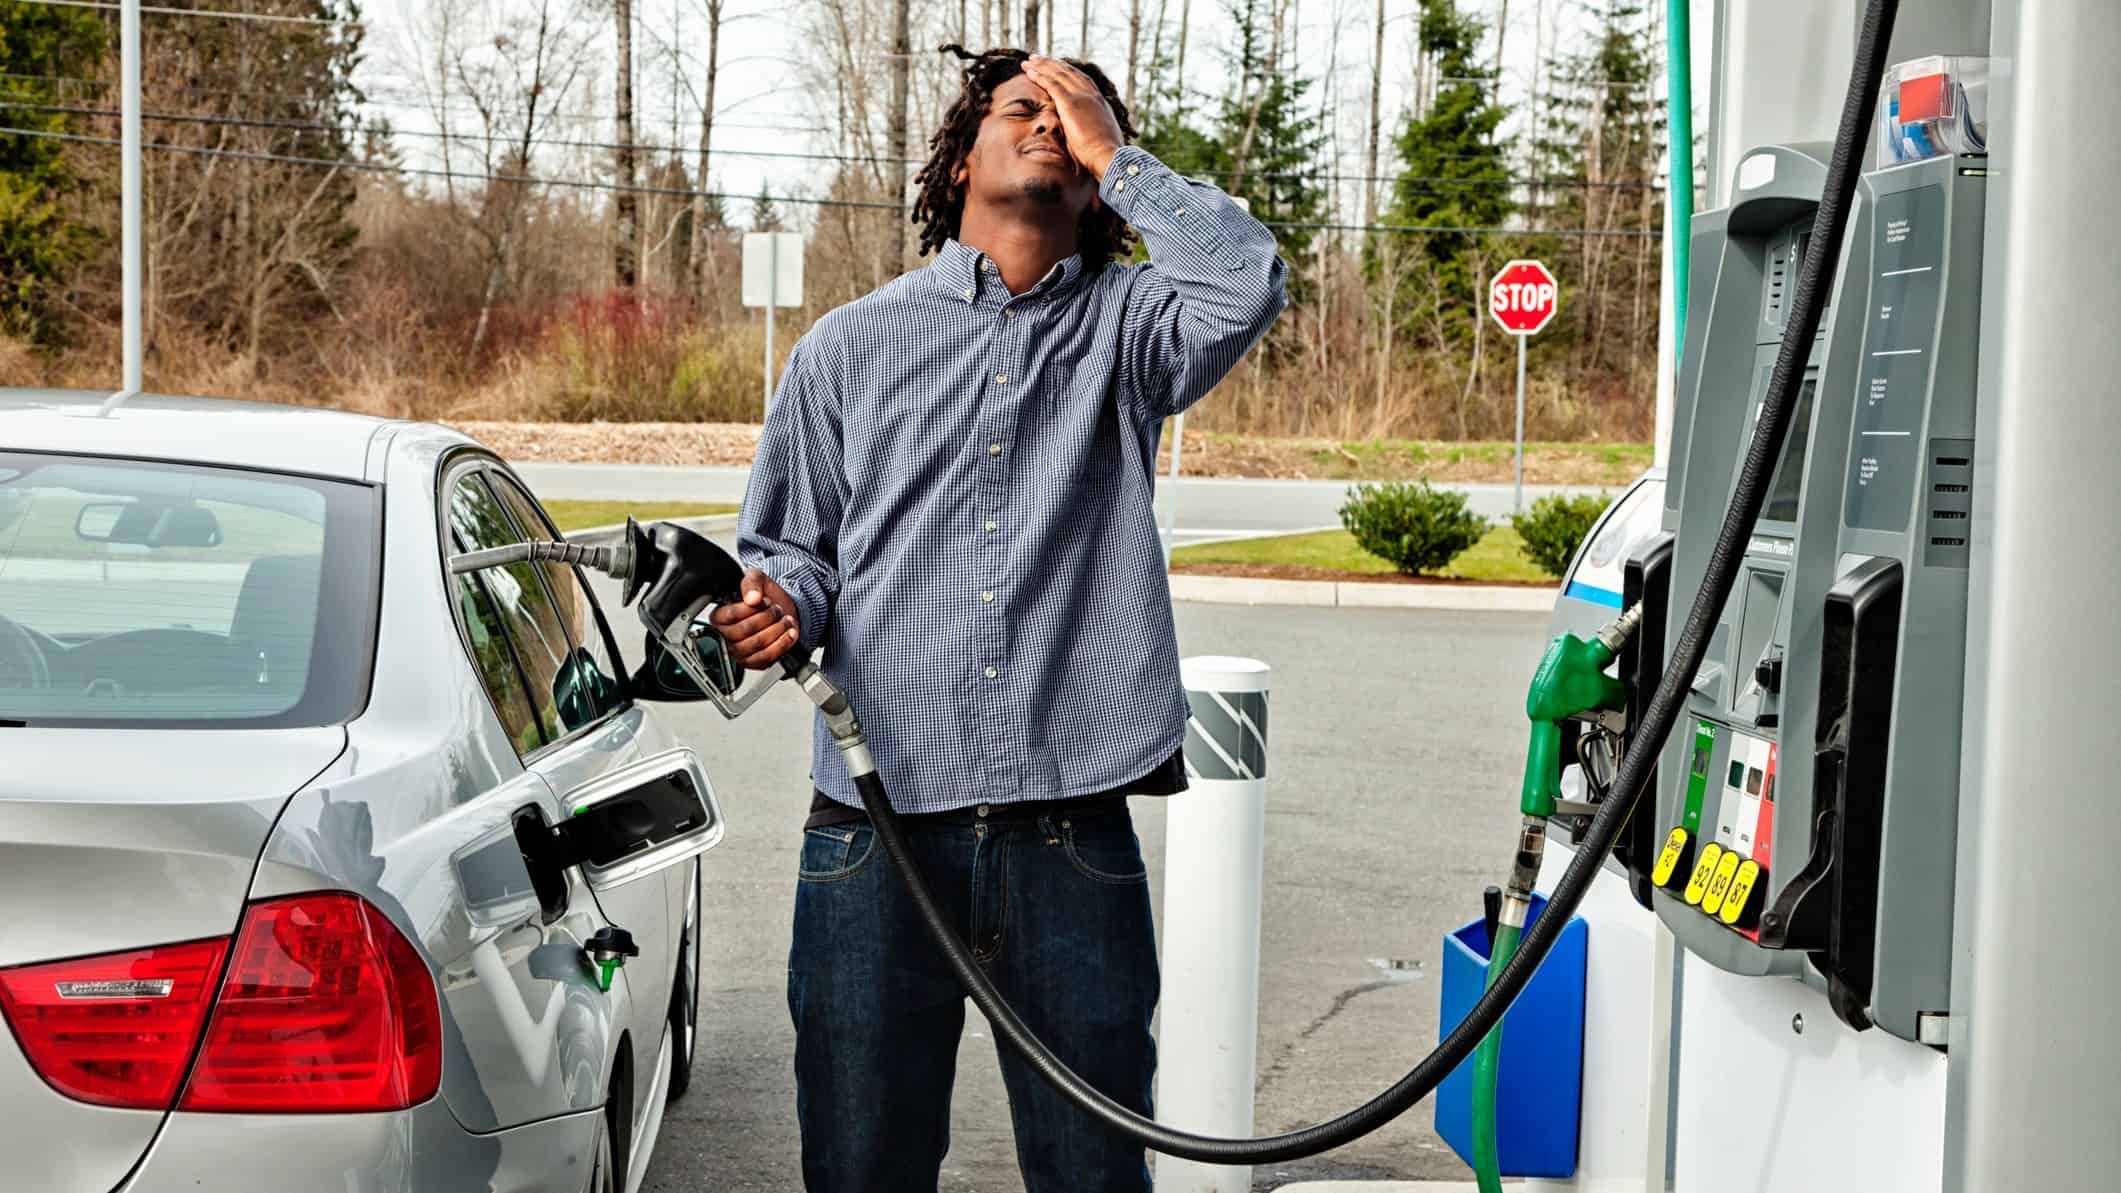 A man looks frustrated with head on hand as he fills up car at service station.